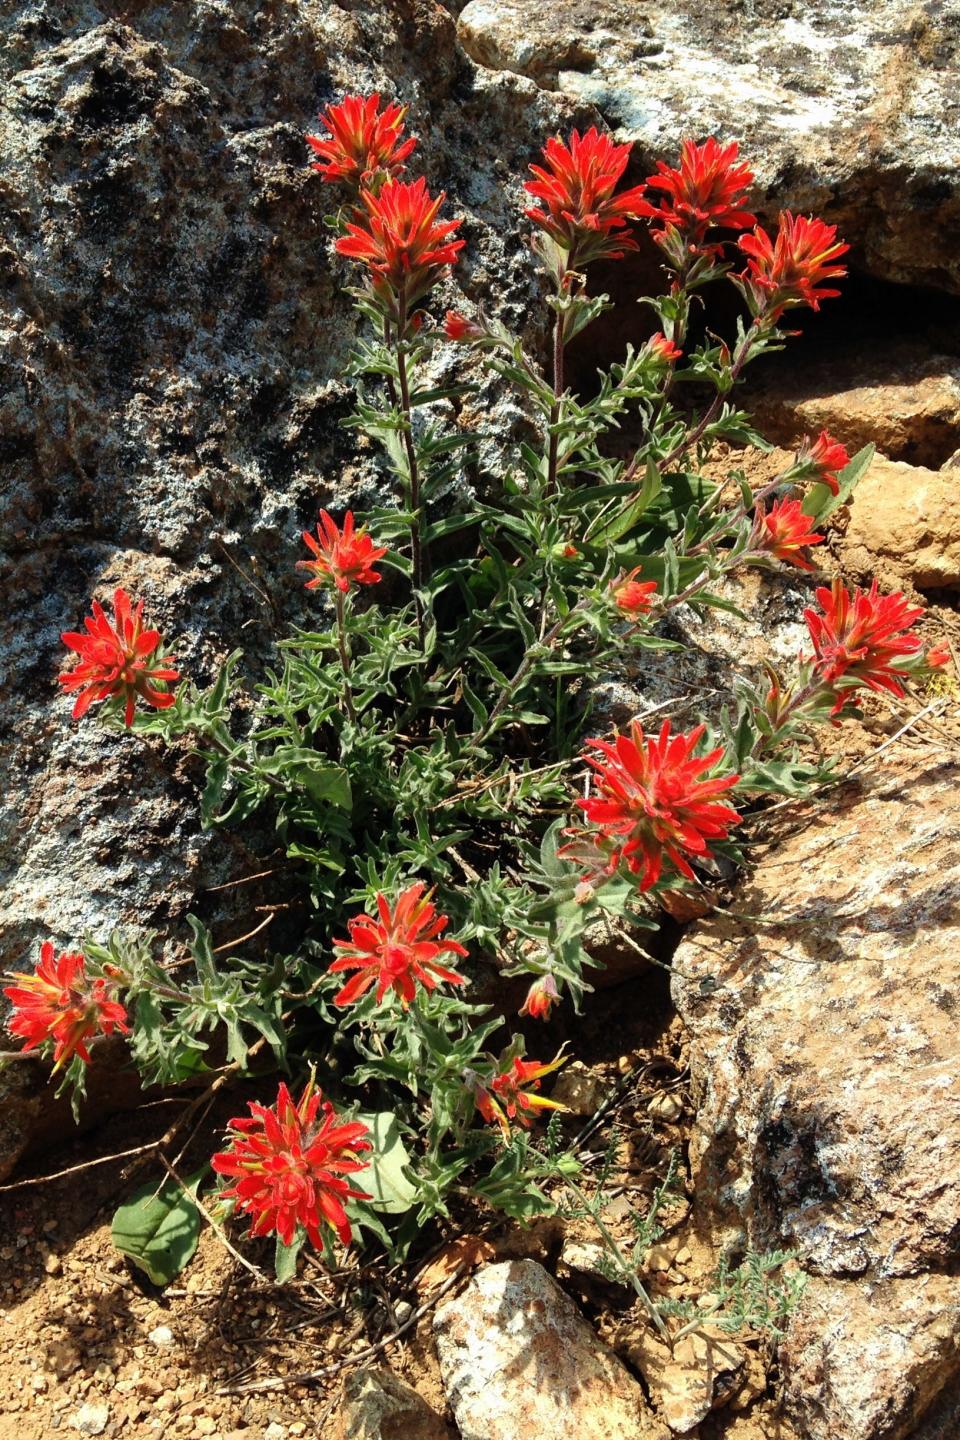 Paintbrush is among the nice mix of wildflowers along the trail to Deadfalls Lakes.